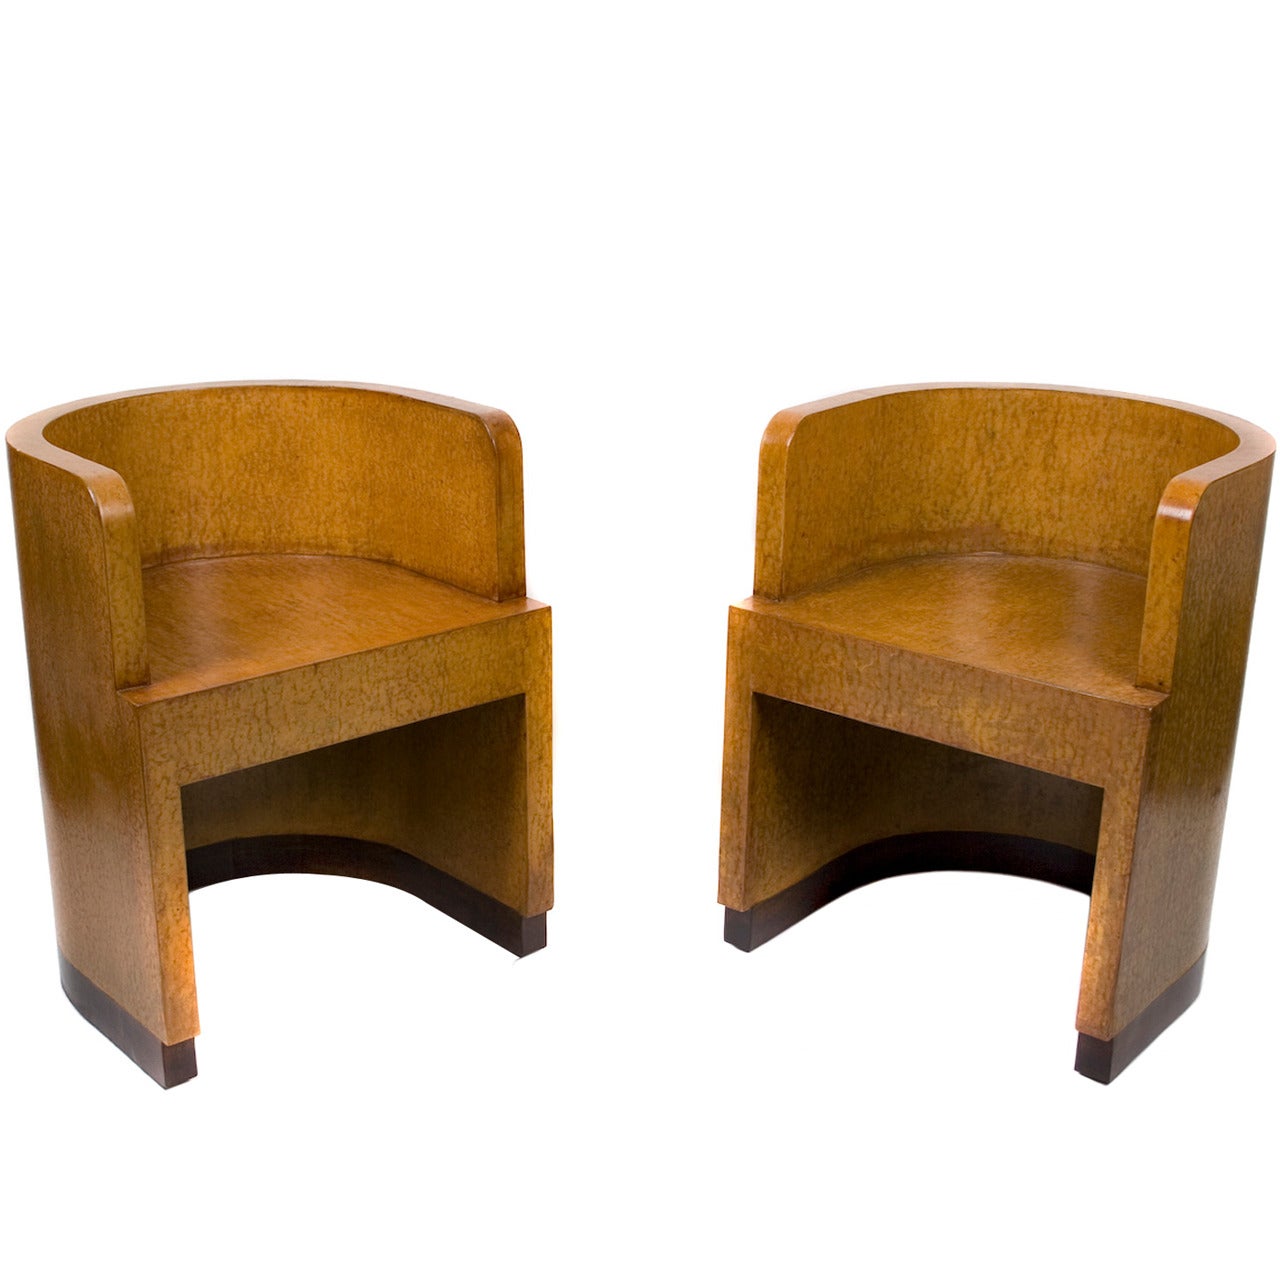 Pair of Italian Boxwood Chairs by Giuseppe Pagano and Gino Levi Montalcini, 1929 For Sale